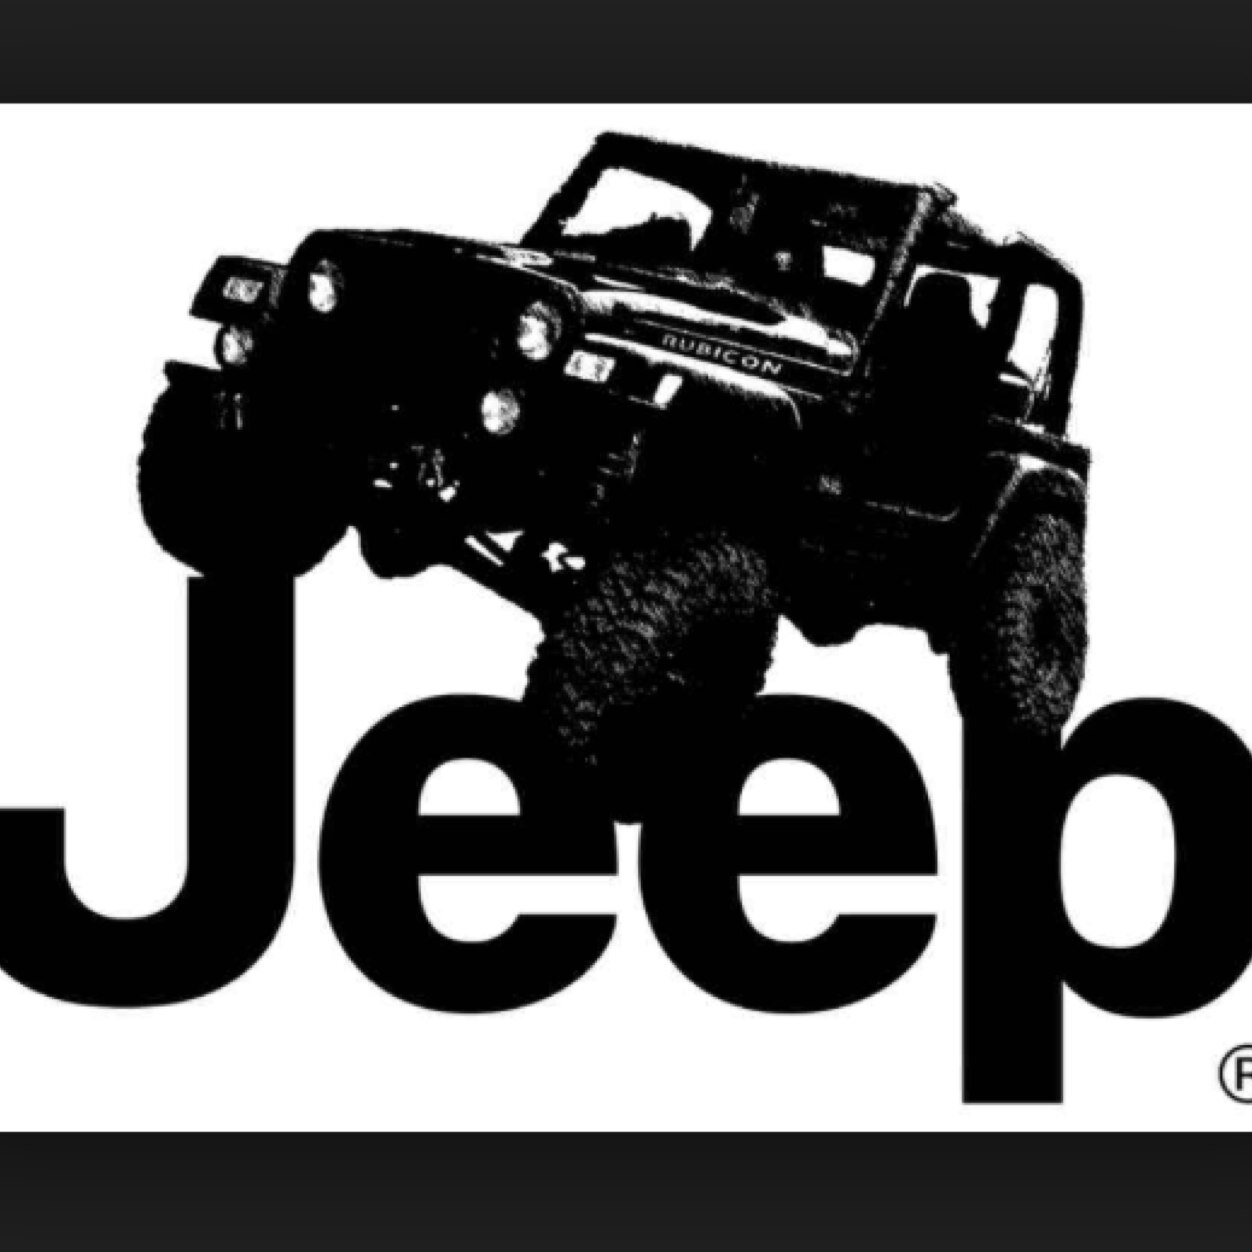 Enjoy our custom edits of some of the sickest Jeeps around! Live the Jeep Lifestyle!!